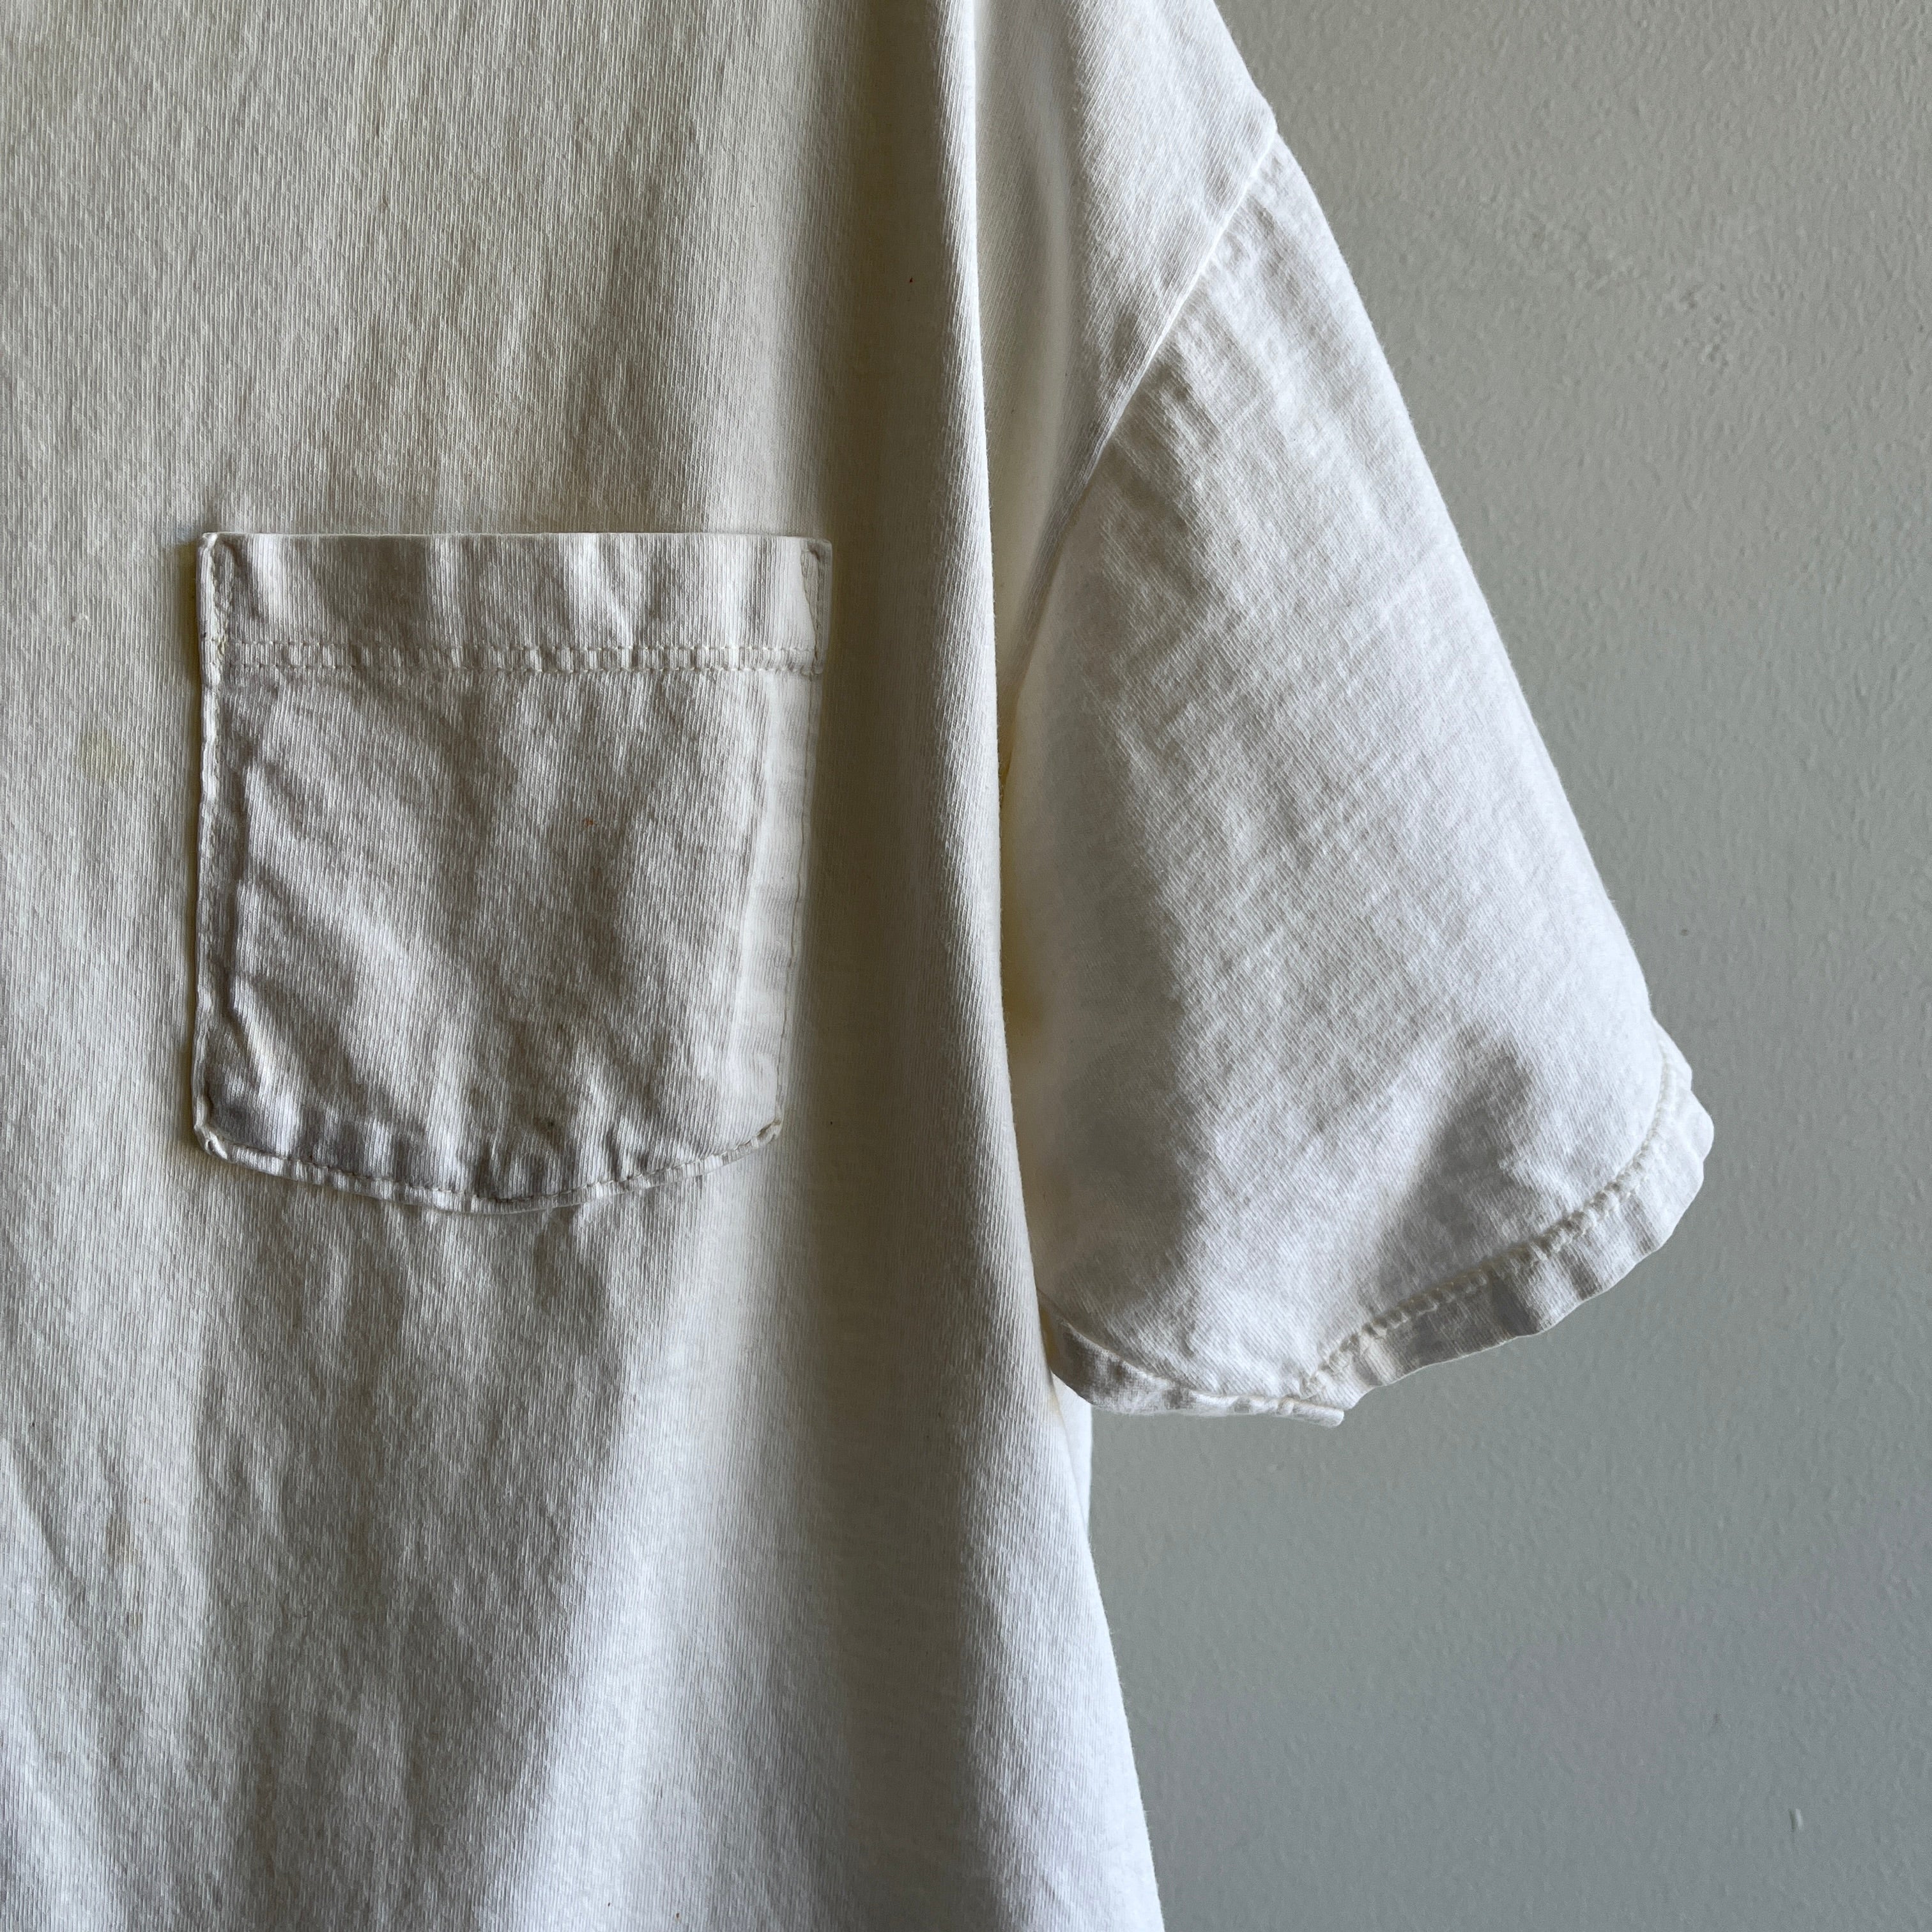 1980s Blank White-ish Pocket T-Shirt by Jerzees